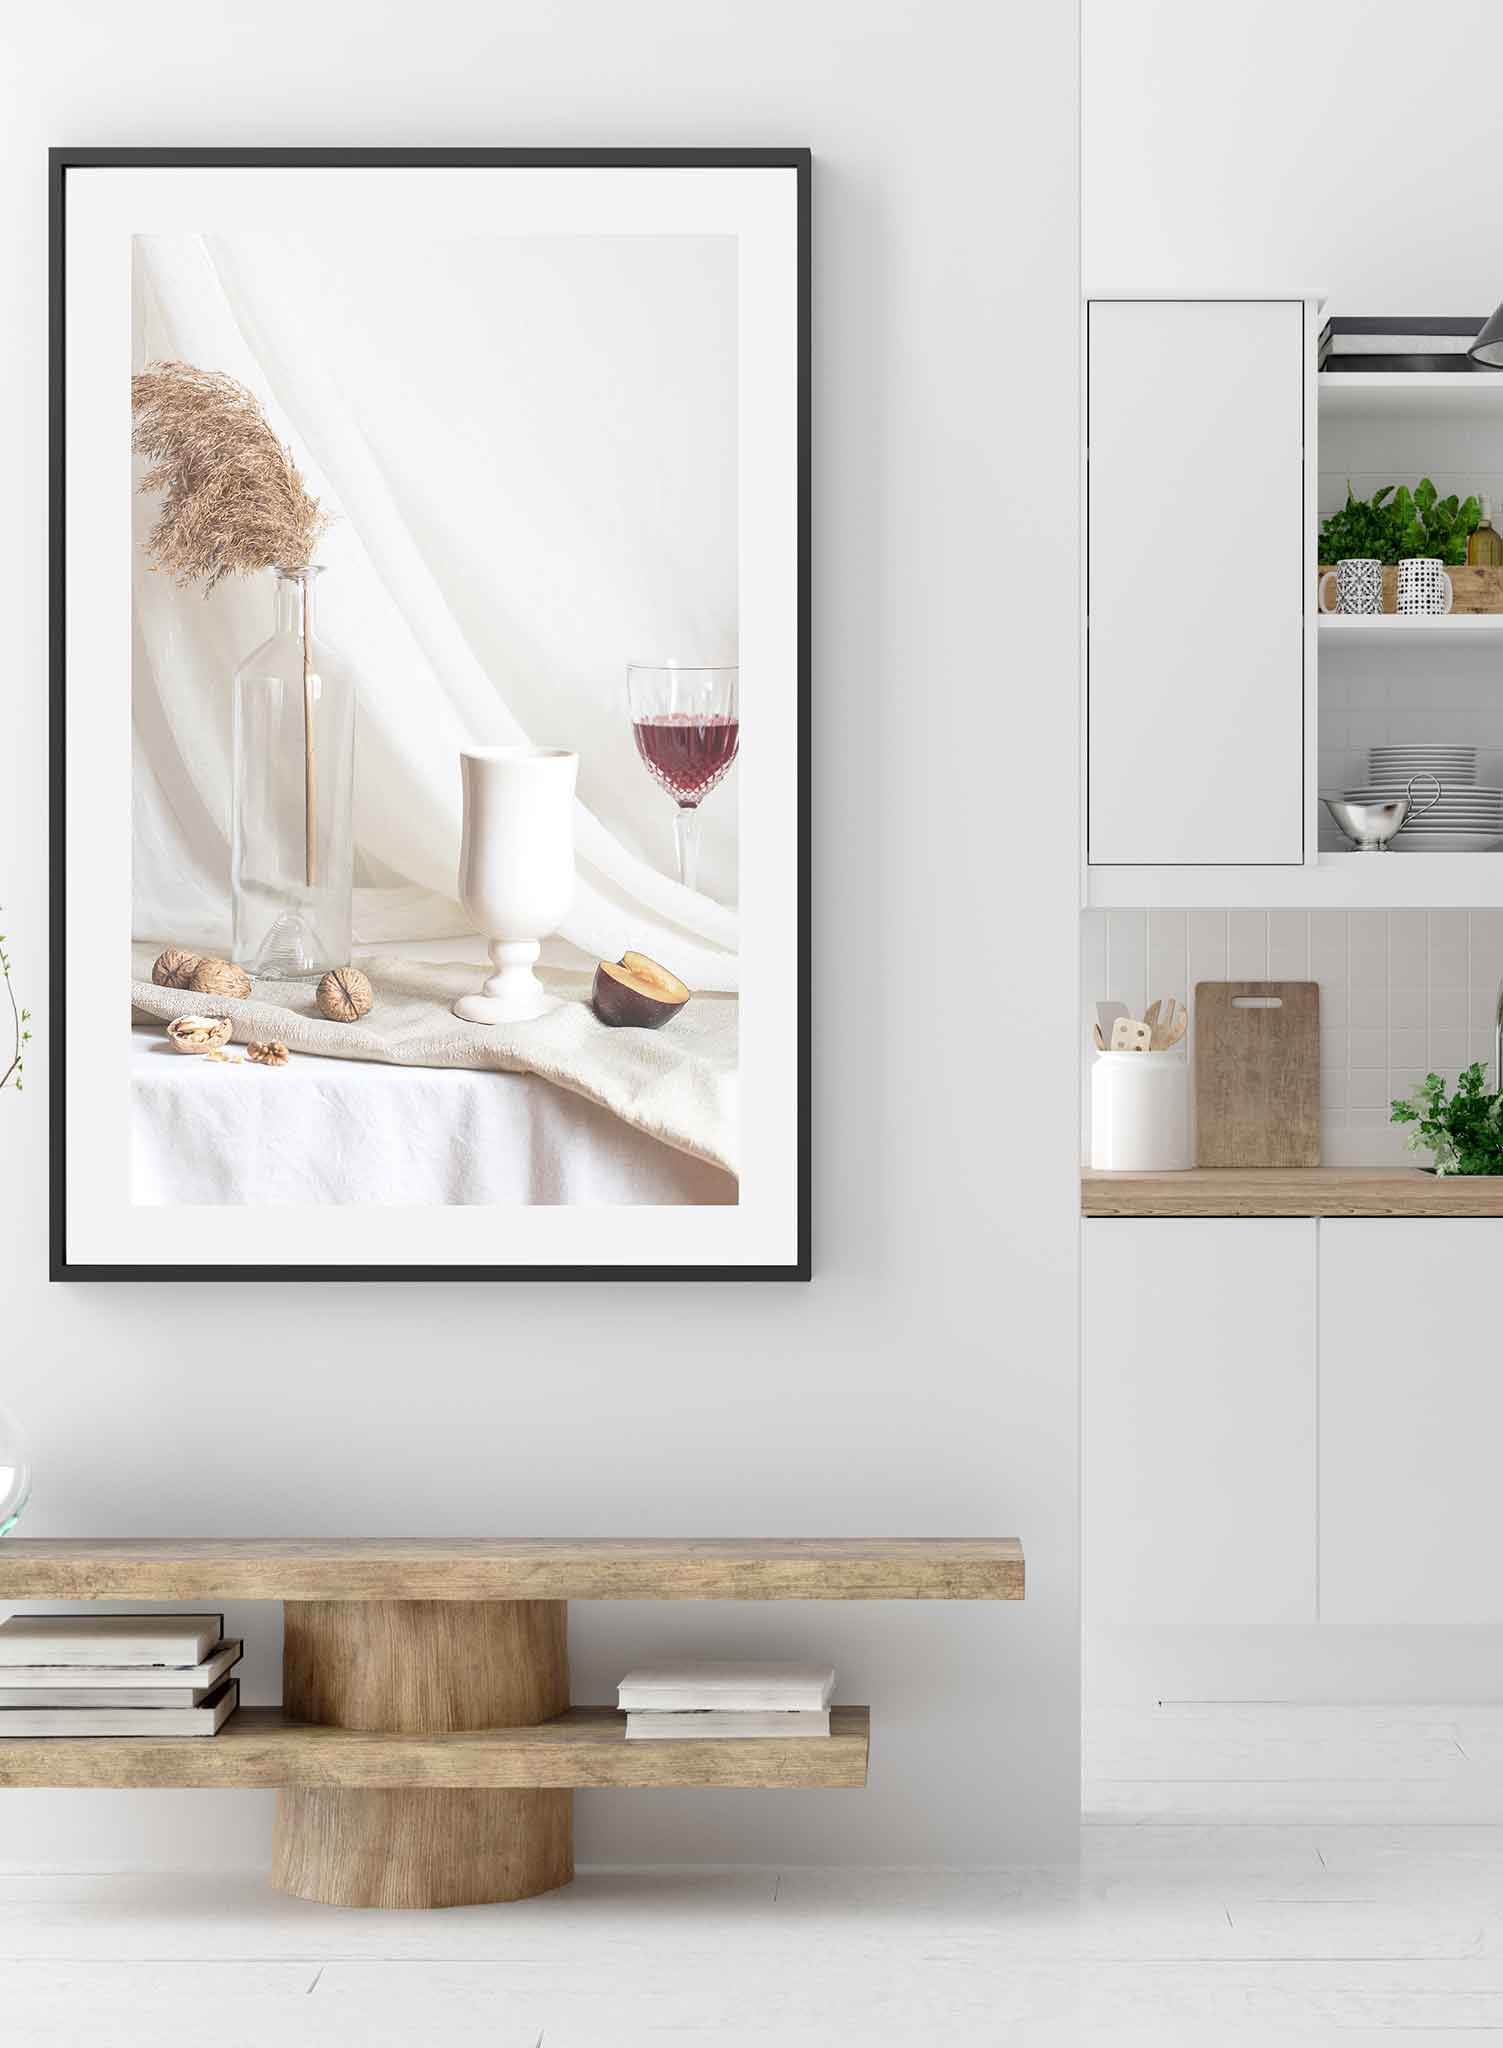 Sensual Buffet is a still life photography poster with fruit and wine by Opposite Wall.